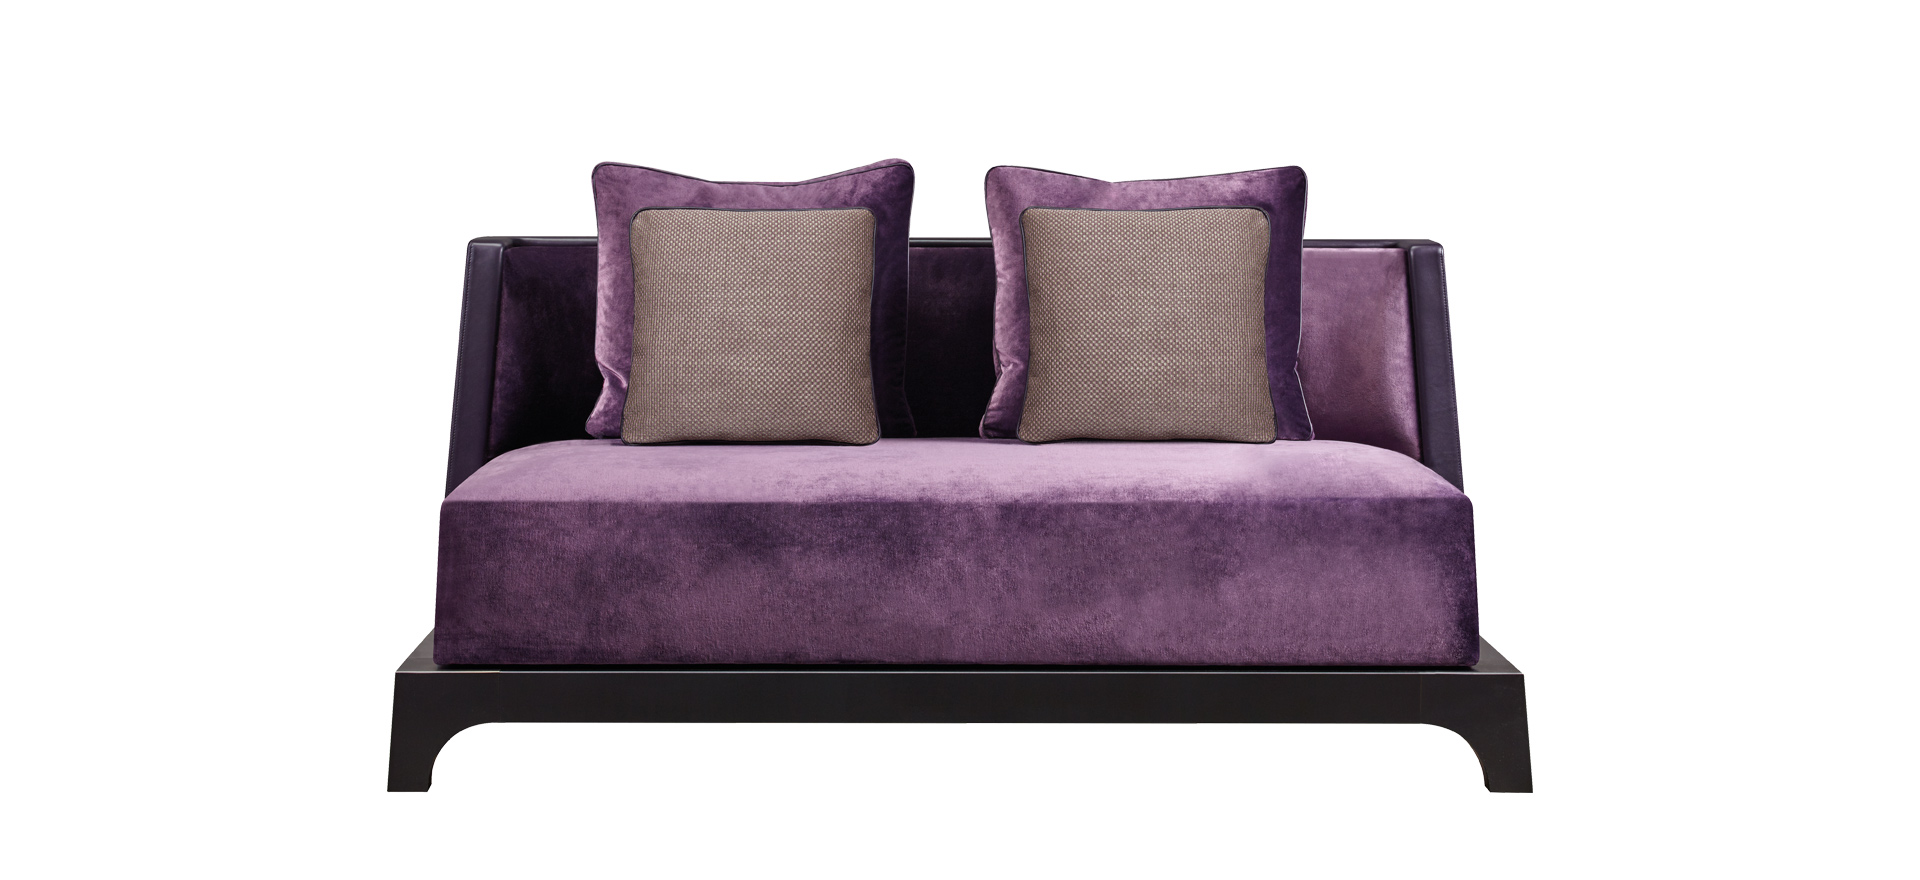 Eaton is a sofa with a wooden or bronze base covered in fabric, from Promemoria's The London Collection | Promemoria